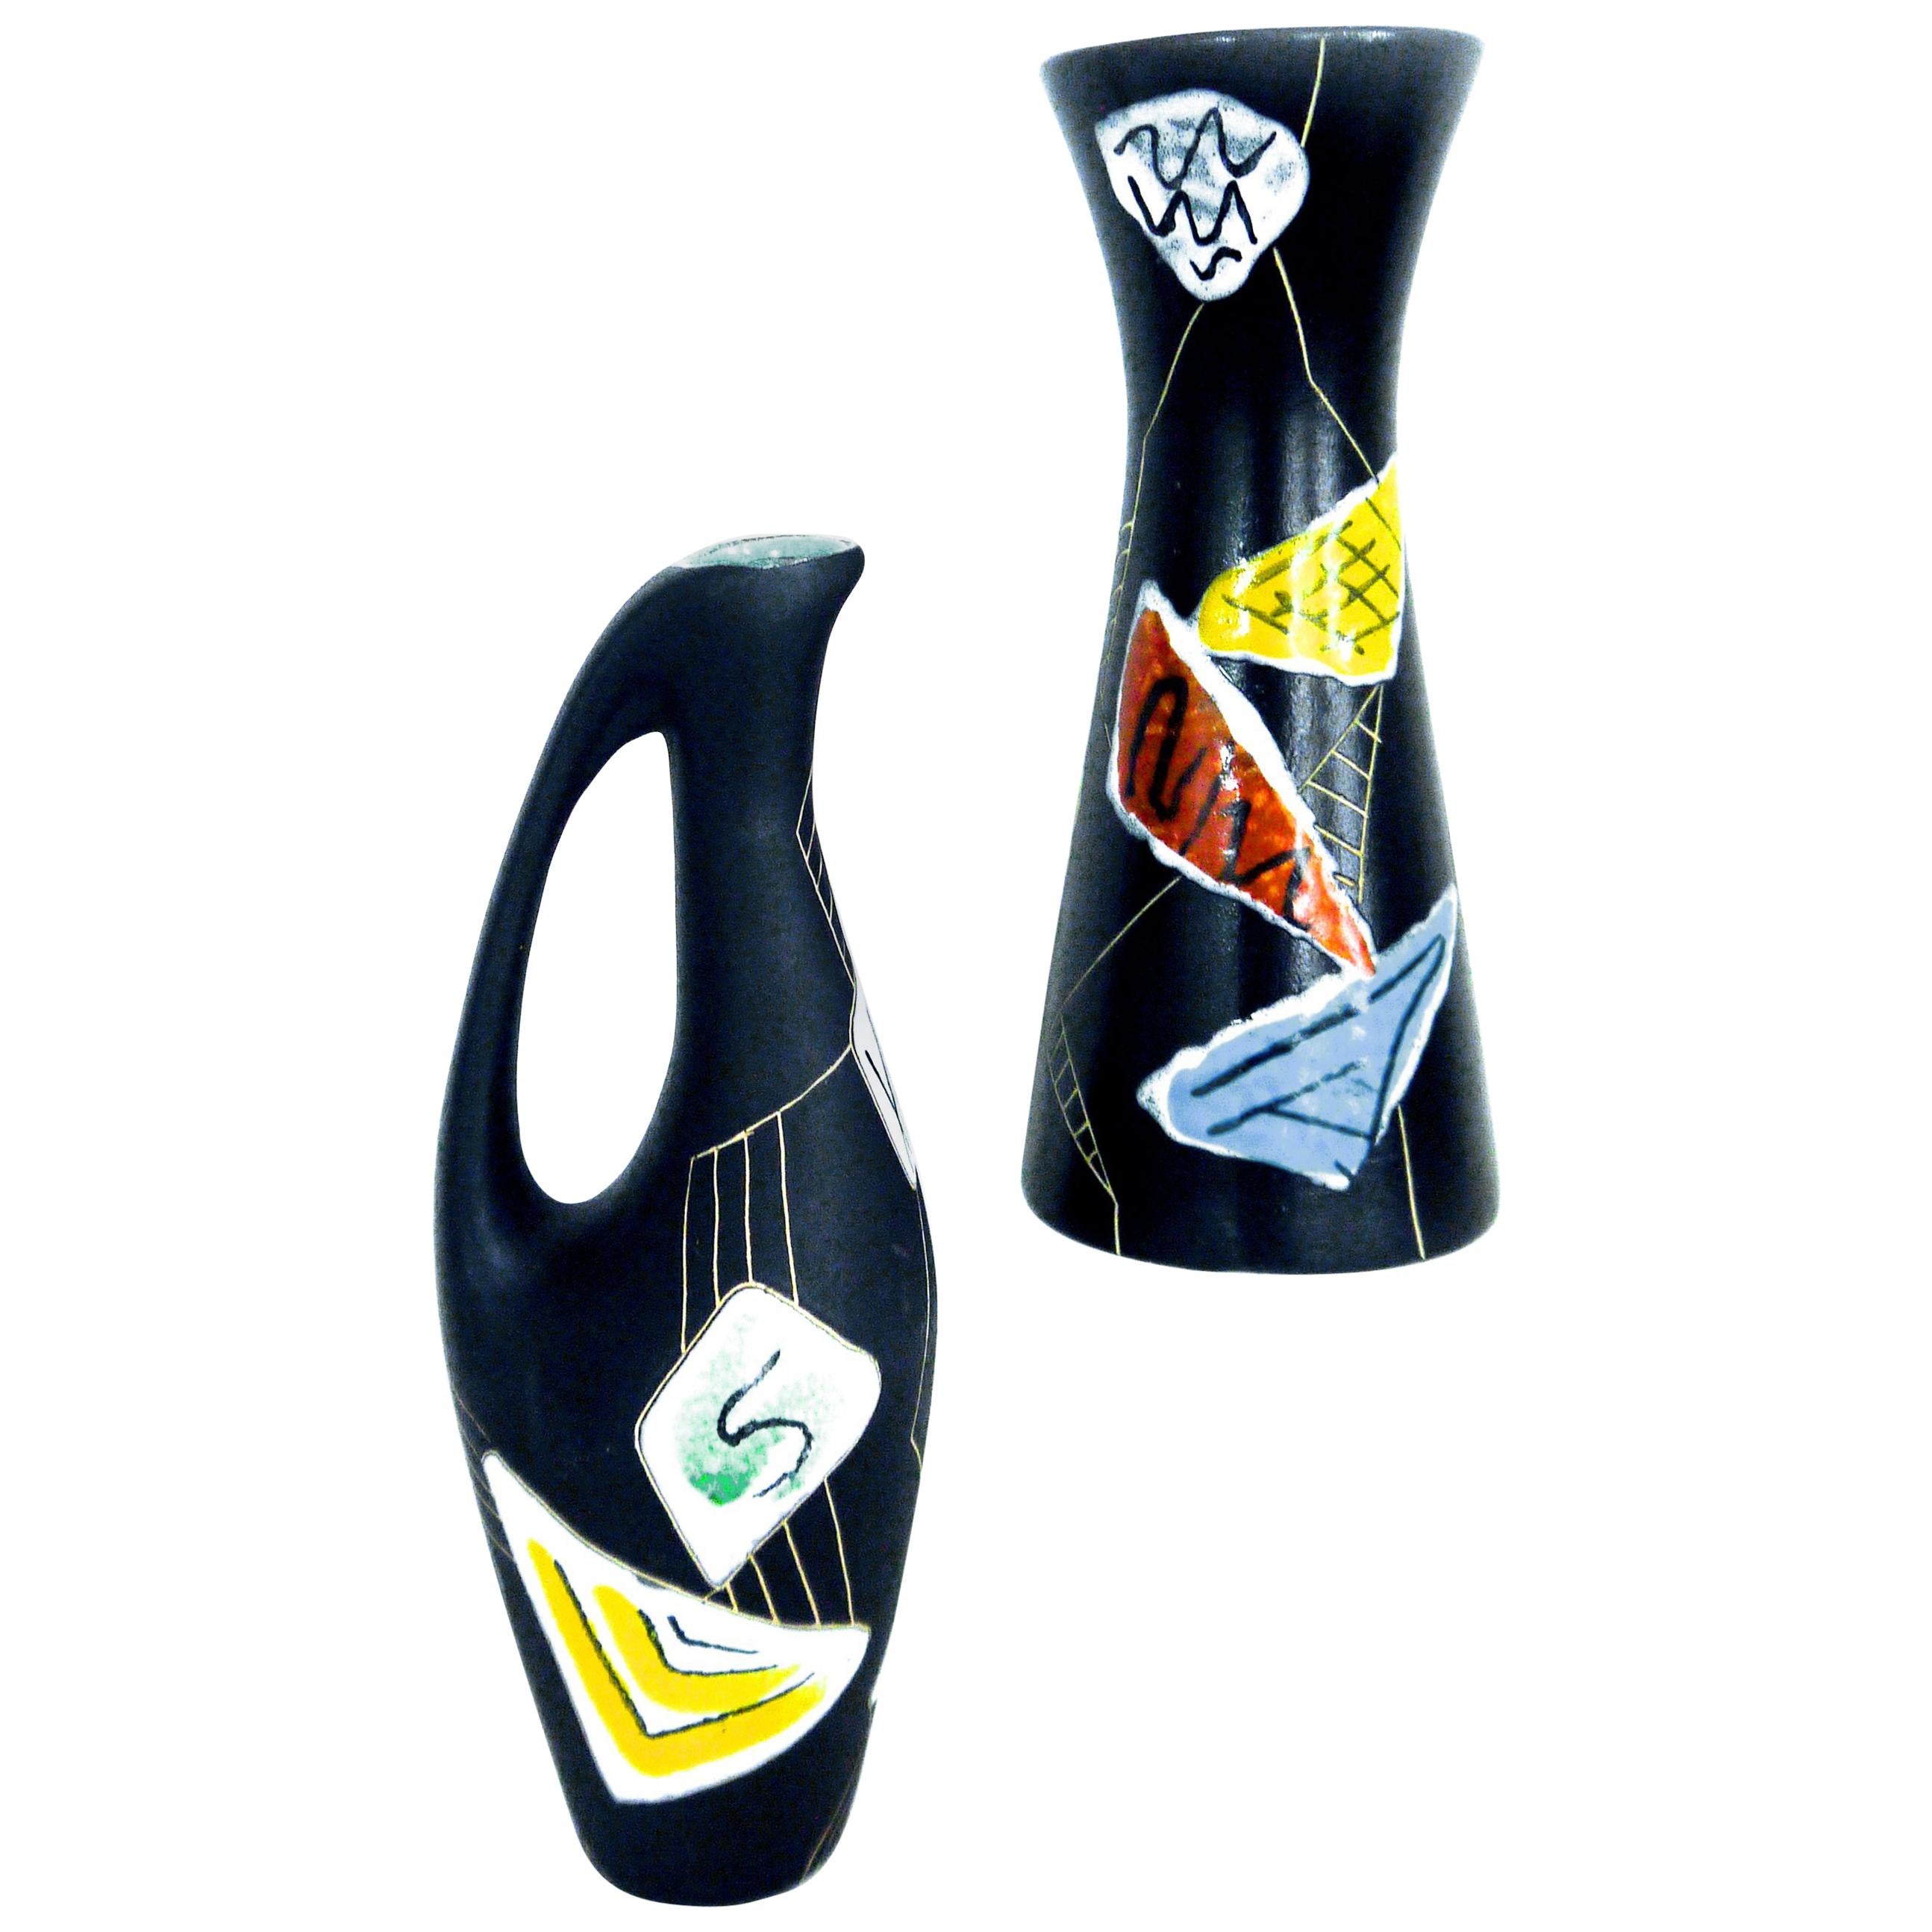 German Modernist Hand Painted Ceramic Pitcher 'small' 'Morroco' Design, 1950s For Sale